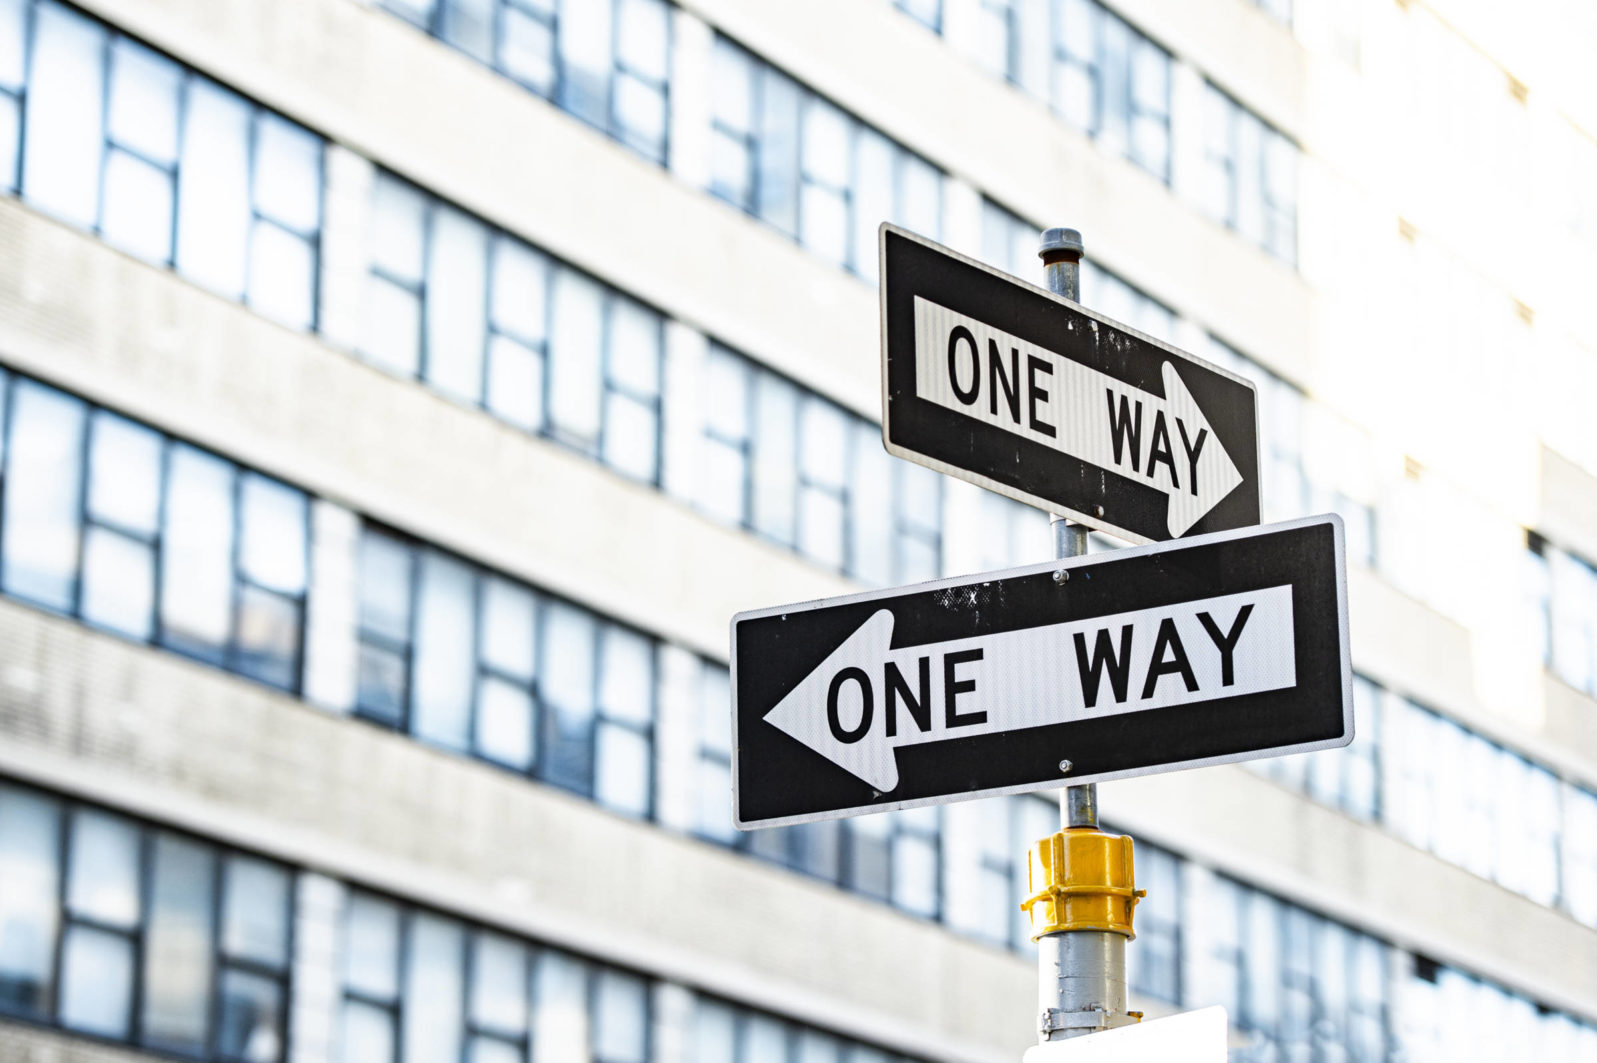 Close-up view of 'one way' road sign with blurred building in the background. Manhattan, New York City, United States of America.